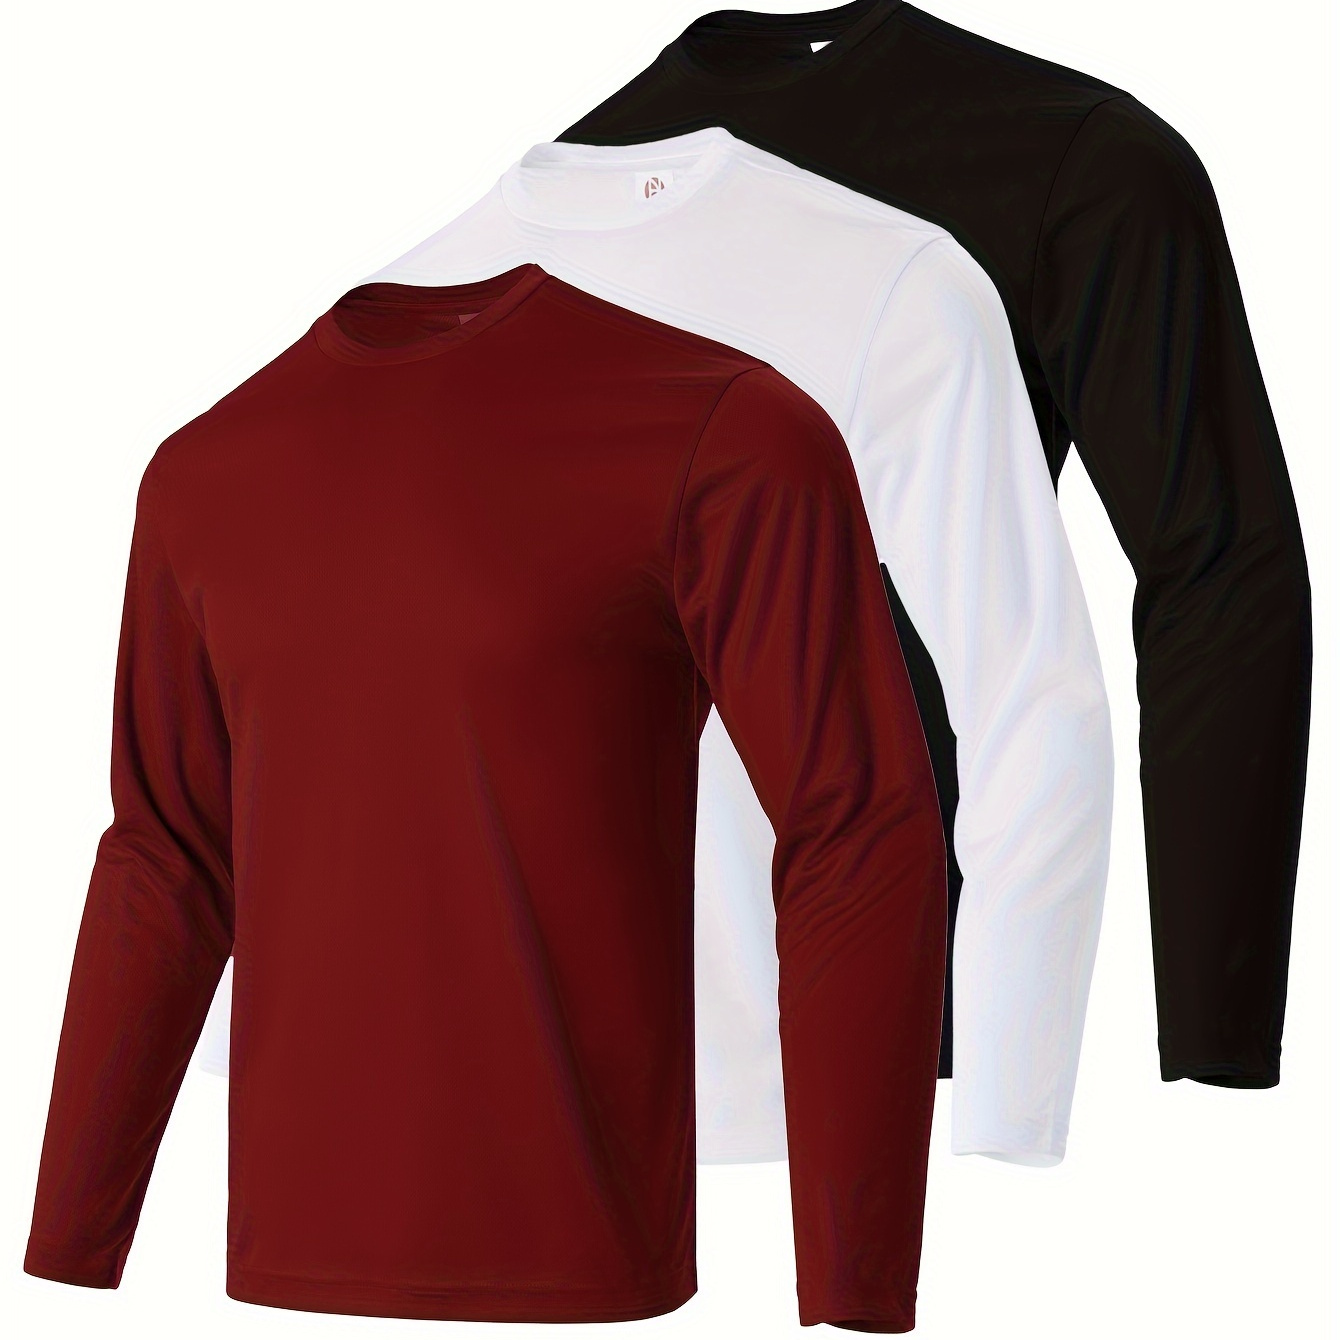 

3pcs Men's Solid Color Long Sleeve T-shirts, Quick Drying Moisture Wicking Breathable T-shirt For Outdoor Gym Running Fitness